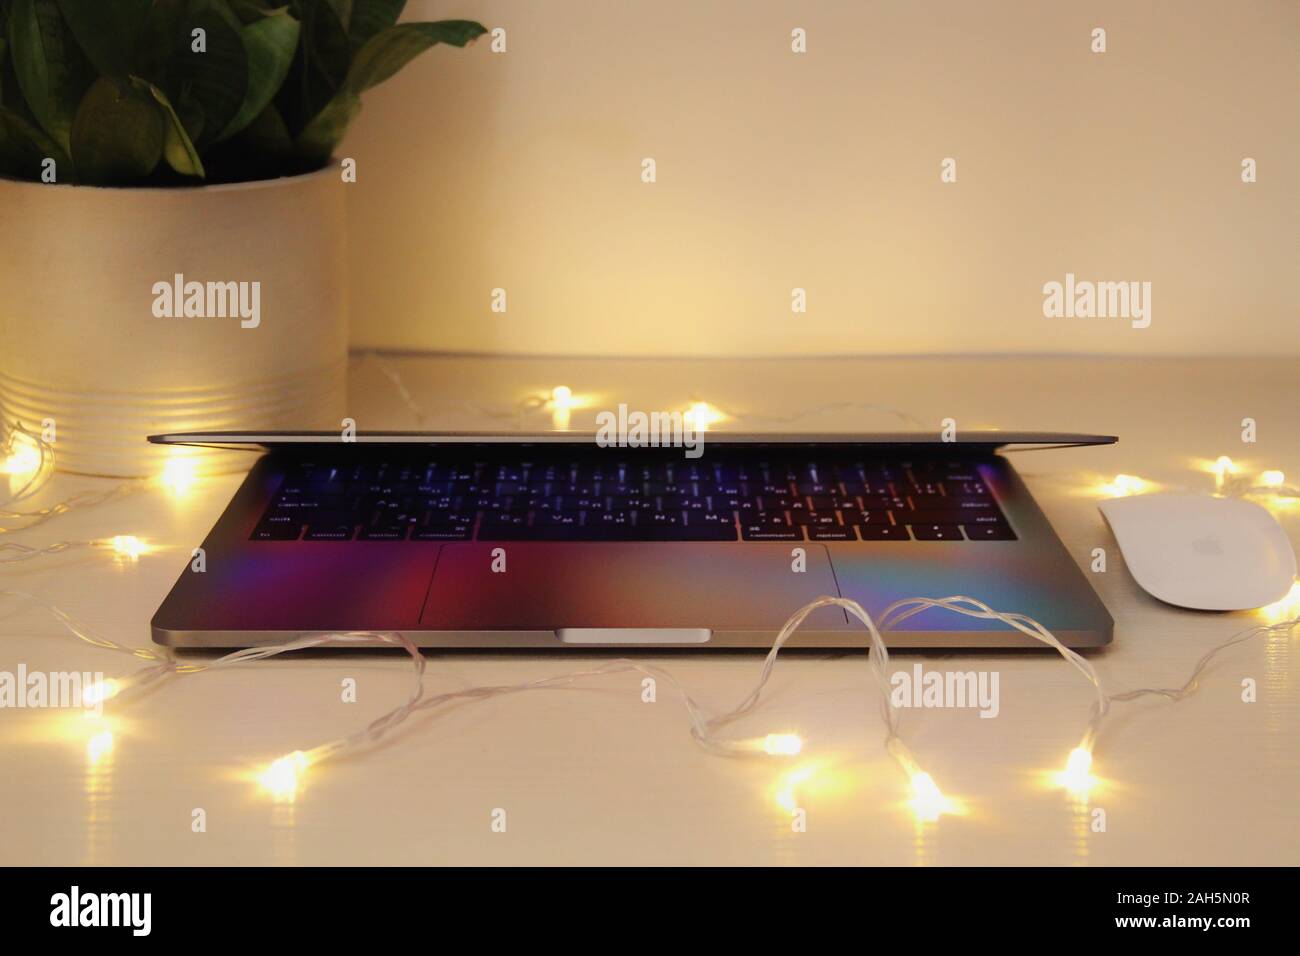 Kyiv Ukraine Modern Macbook Laptop Computer Apple Magic Mouse On White In Interior With Domestic Plants And Bokeh Technologies Online Trends Wo Stock Photo Alamy